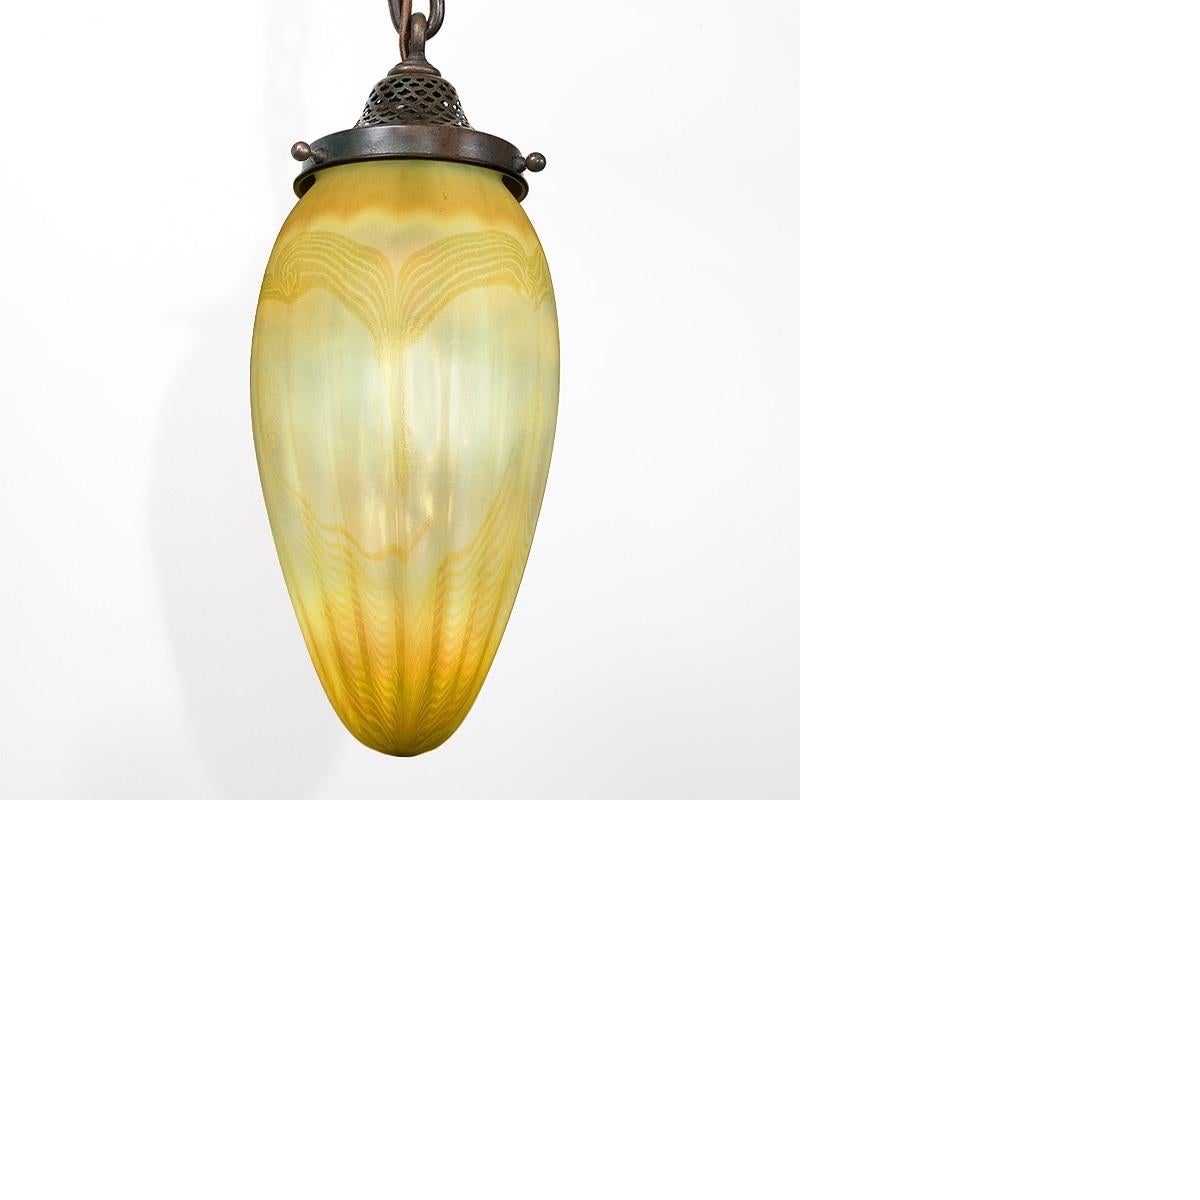 A Tiffany Studios New York golden stalactite chandelier with pulled iridescent gold feather decoration. Circa 1900. A similar fixture is pictured in: Tiffany Lamps and Metalware: An illustrated reference to over 2000 models, by Alastair Duncan,